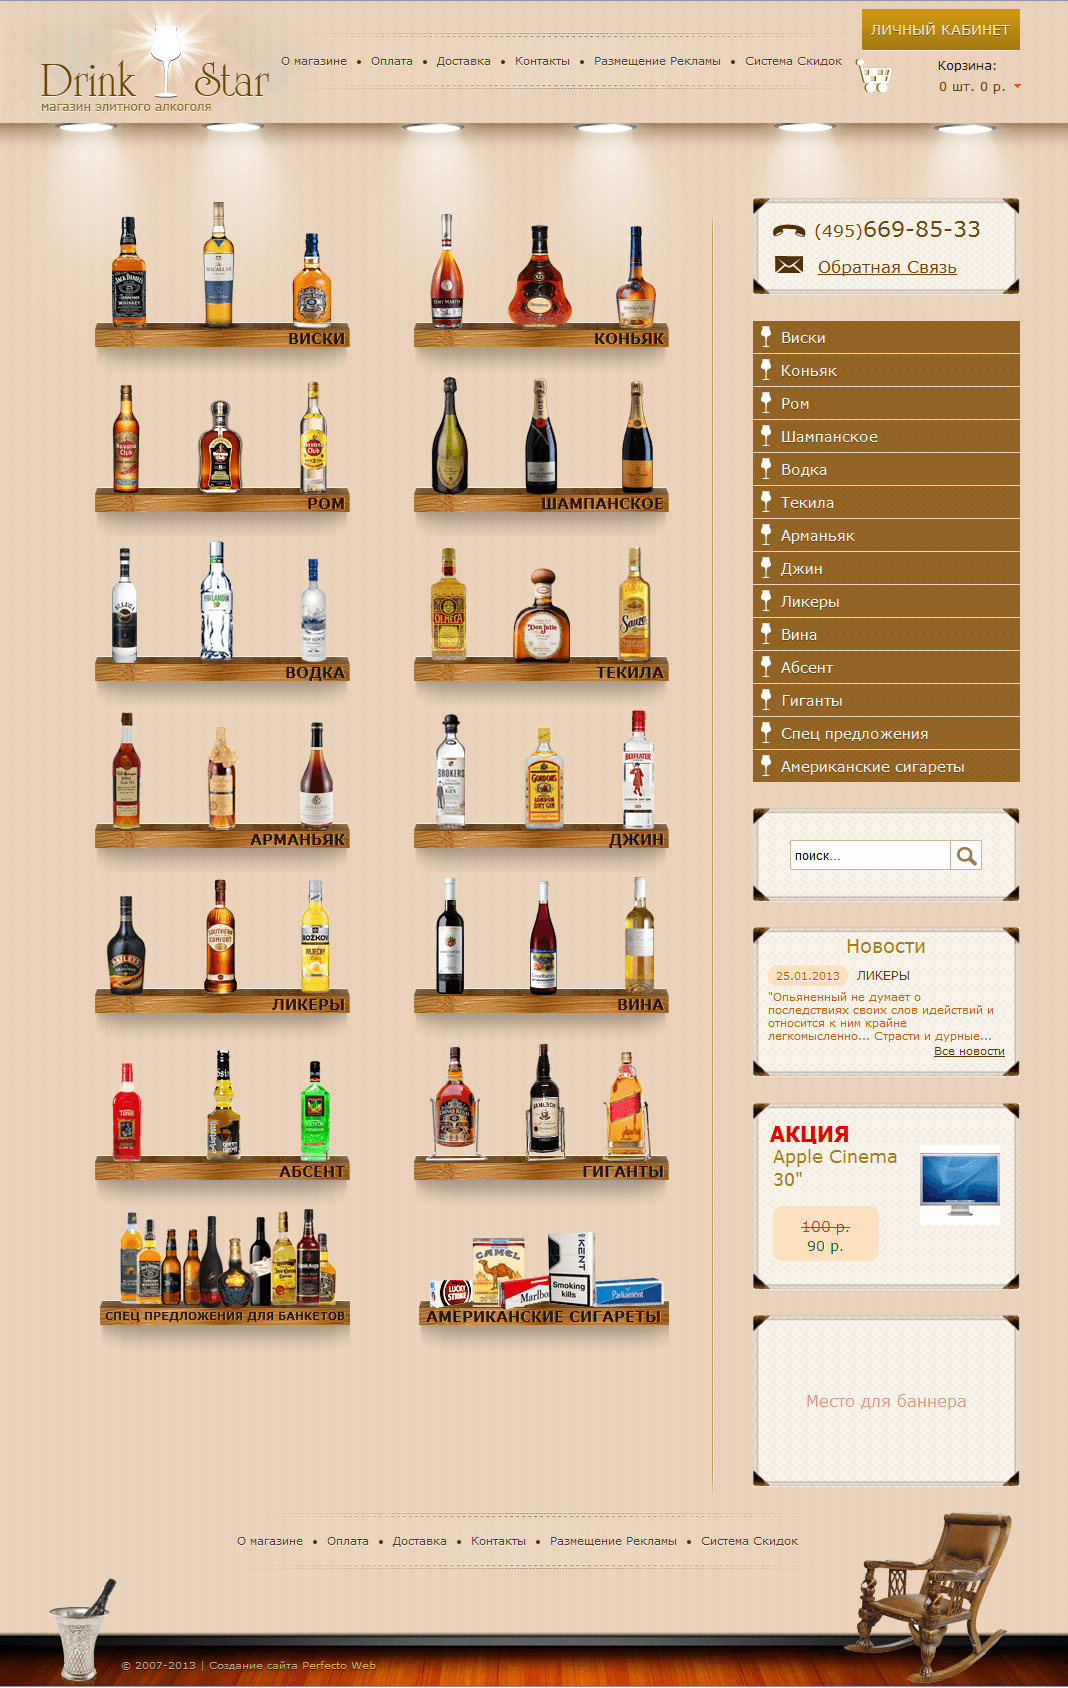 Drink Star №1- Home page